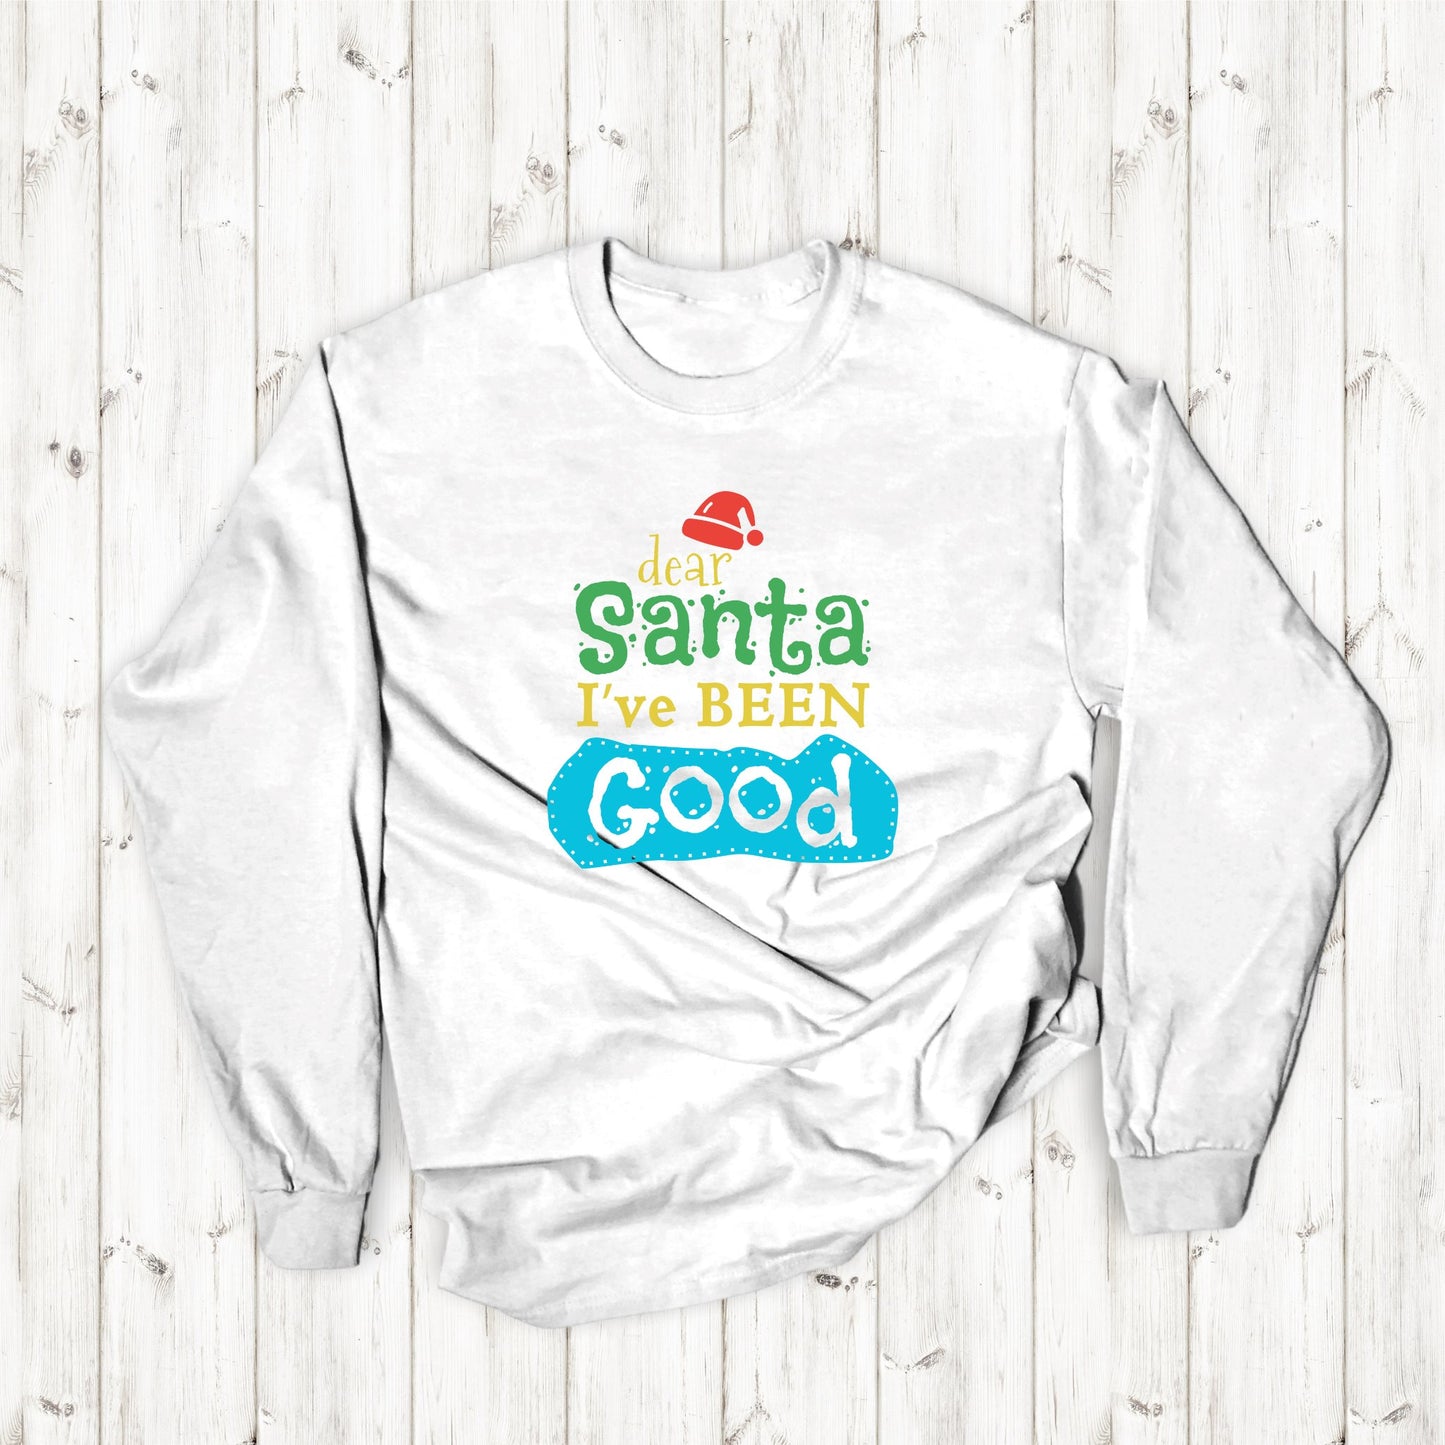 Christmas Long Sleeve T-Shirt - Dear Santa I've Been Good - Cute Christmas Shirts - Youth and Adult Christmas Long Sleeve TShirts Long Sleeve T-Shirts Graphic Avenue White Adult Small 